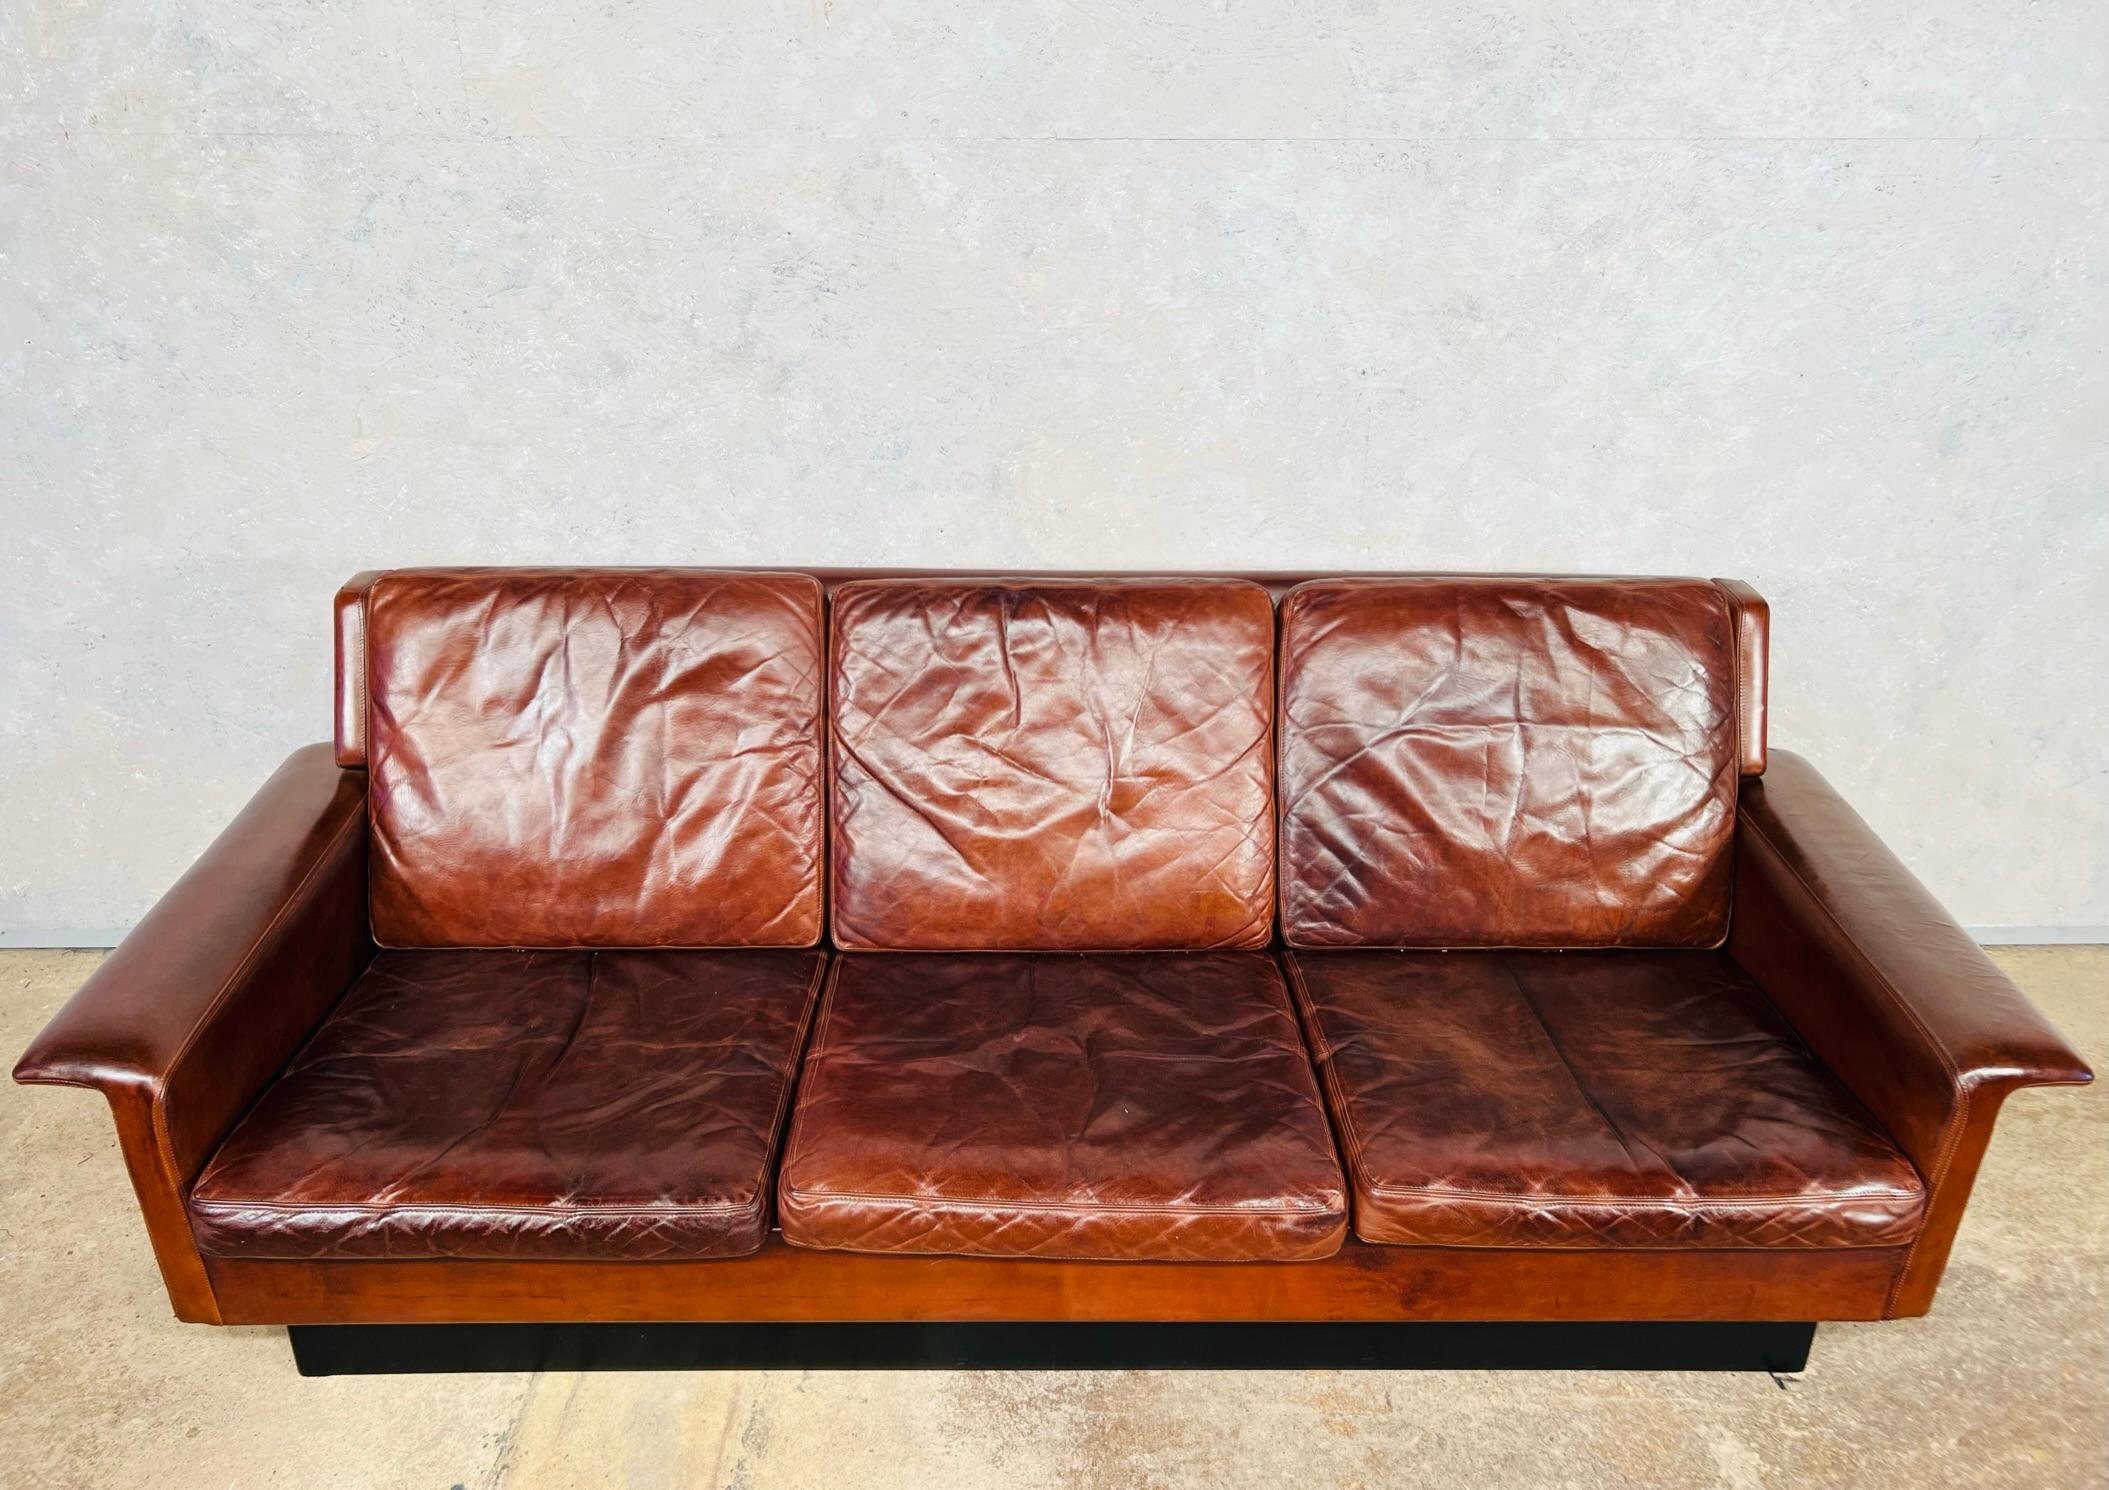 Vintage 1970 Arne Vodder Brown 3 Seater Leather Sofa For Fritz Hansen #533 In Good Condition For Sale In Lewes, GB